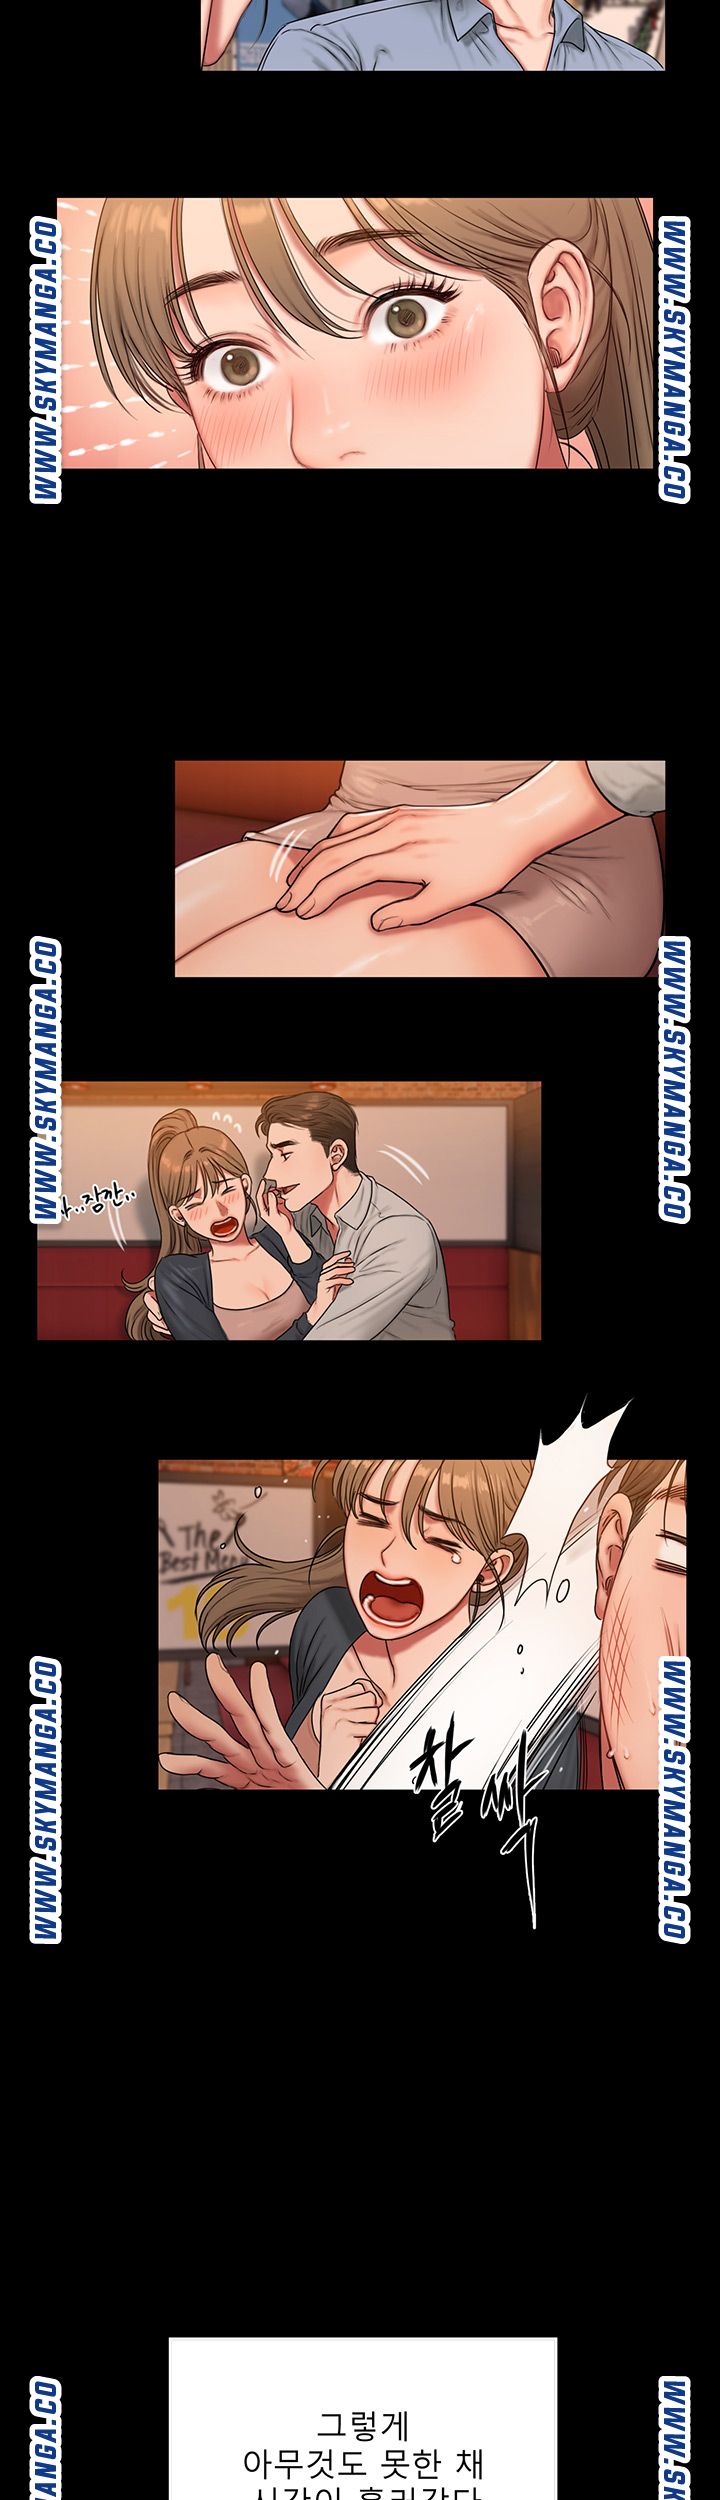 Friends Raw - Chapter 3 Page 28